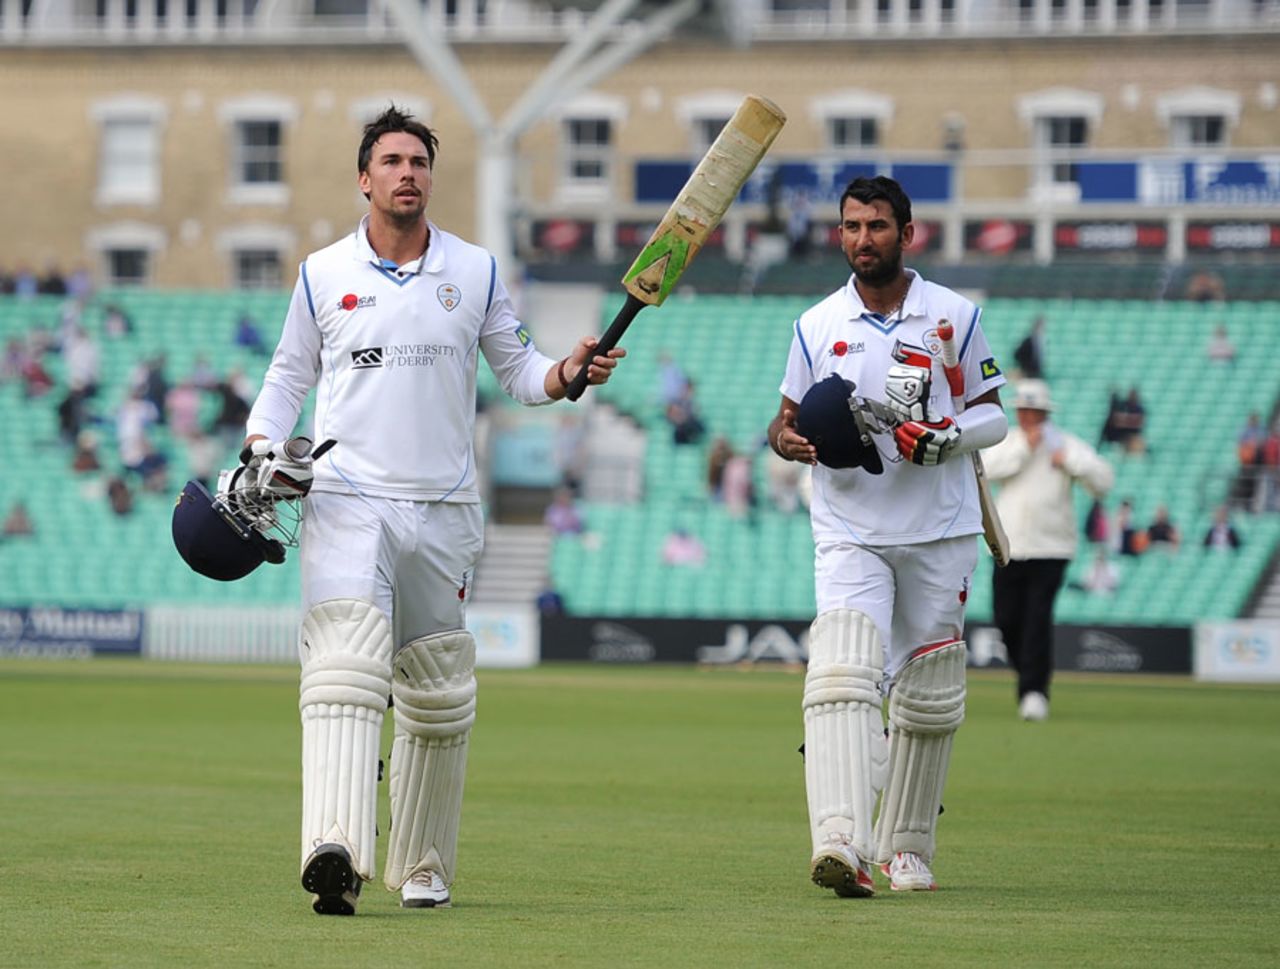 Billy Godleman and Cheteshwar Pujara guided Derbyshire to victory with a 154-run stand, Surrey v Derbyshire, County Championship, Division Two, The Oval, September 17, 2014